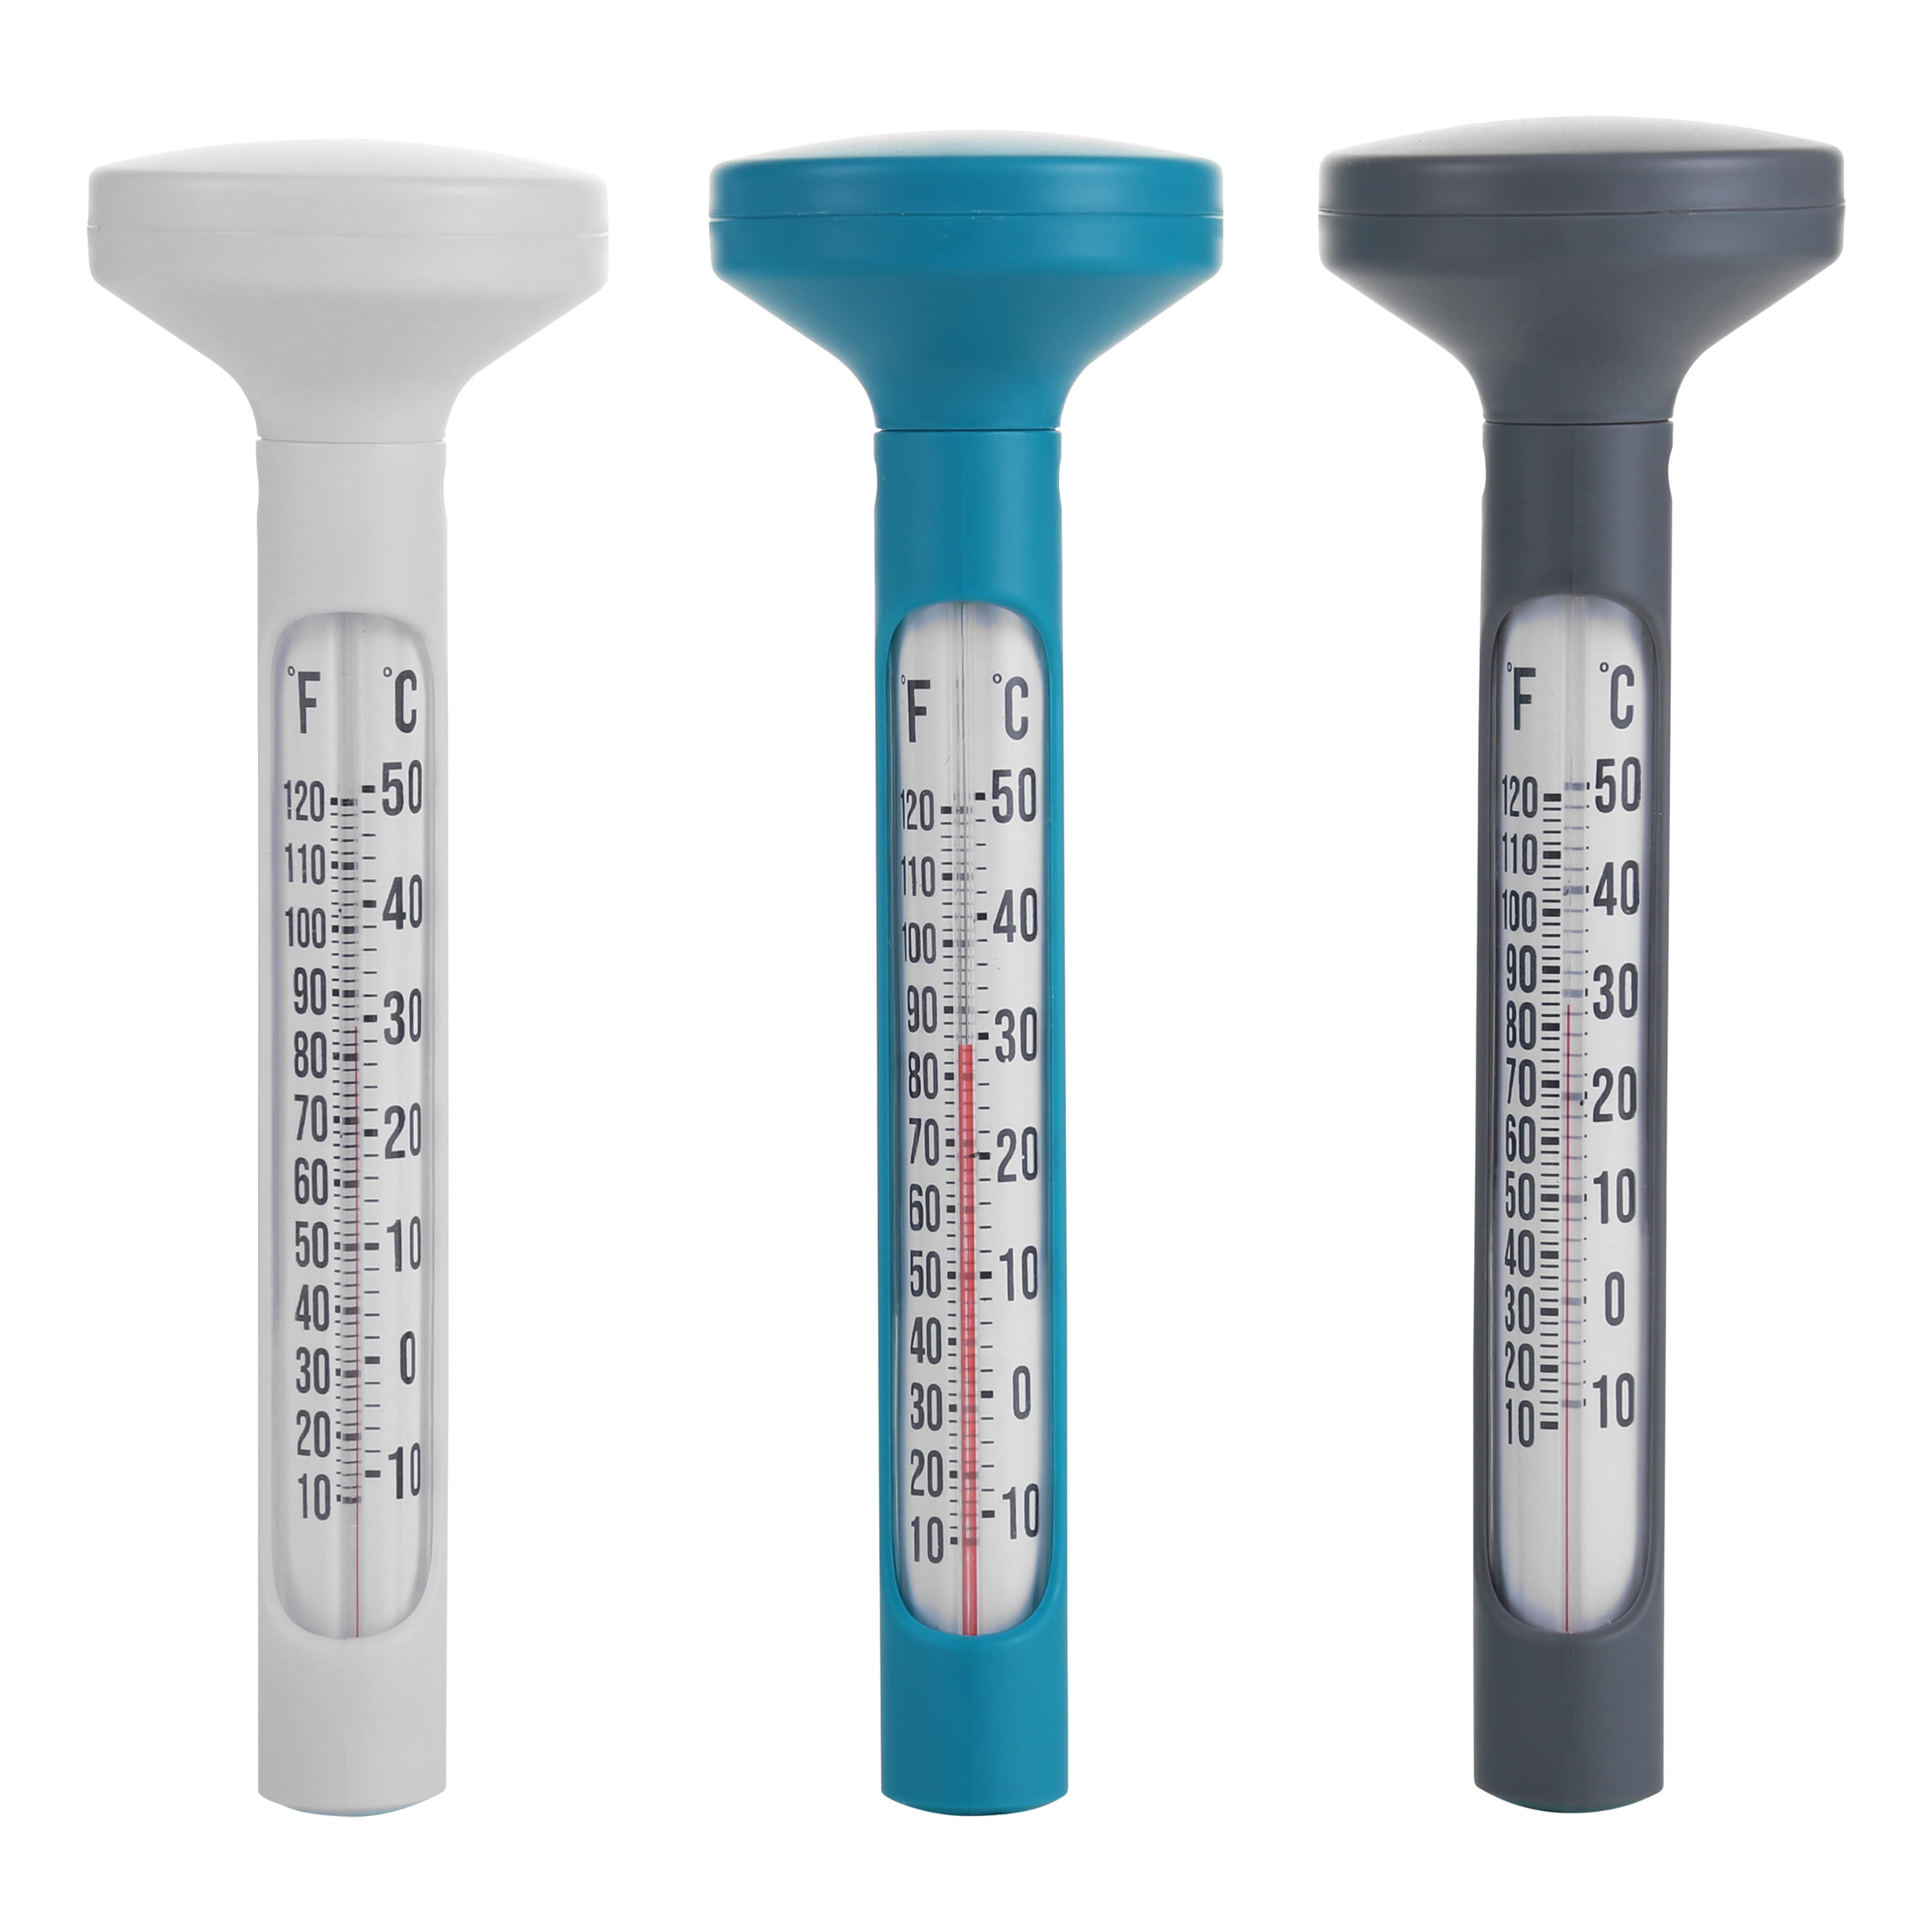 Mainstays Floating Pool Thermometer - Teal Sachet, Flannel Grey and White